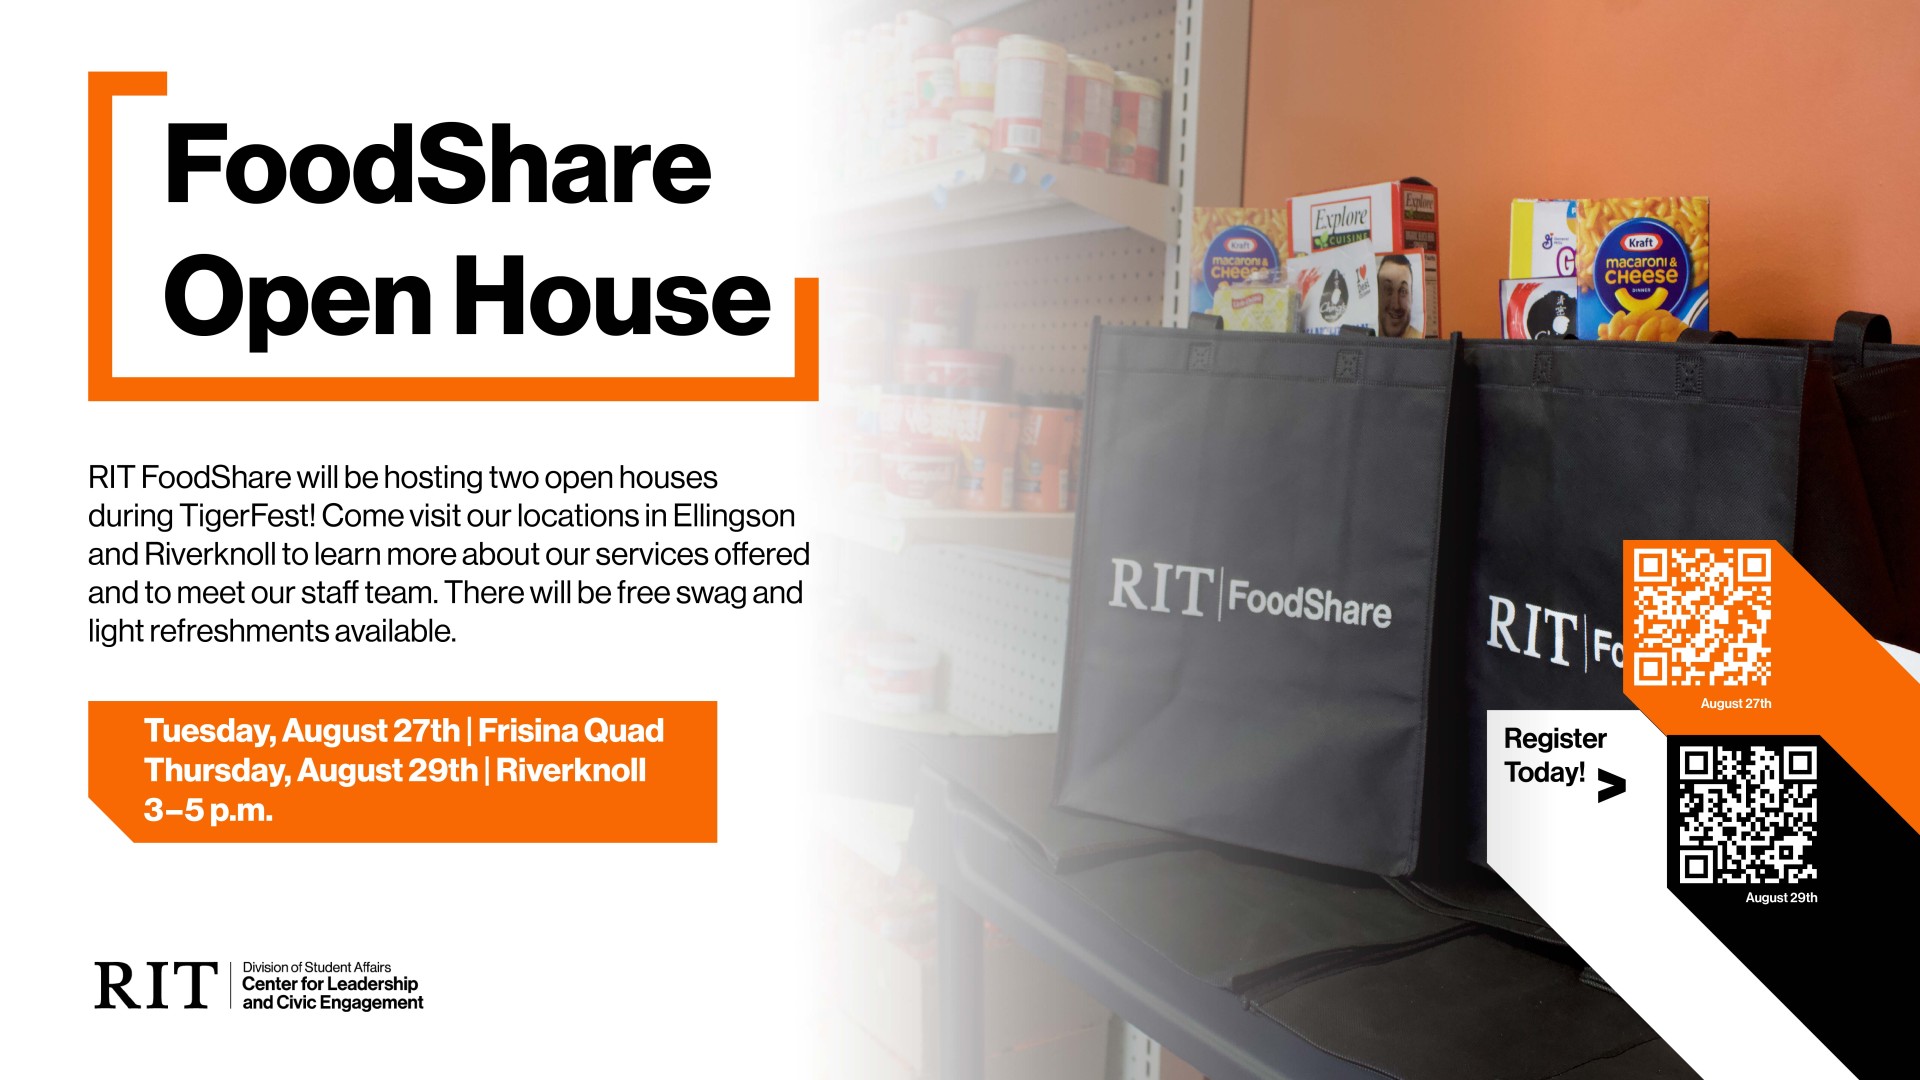 On the right hand side of the flyer there is two black RIT FoodShare bags filled with assorted non-perishable food items, a QR code for both event days, and on the left hand side is the text  RIT FoodShare will be hosting two open houses during TigerFest! Come visit our locations in Ellingson and Riverknoll to learn more about our services offered and to meet our staff team. There will be free swag and light refreshments available. With the times below saying 3-5 pm for both the 27th and the 29th